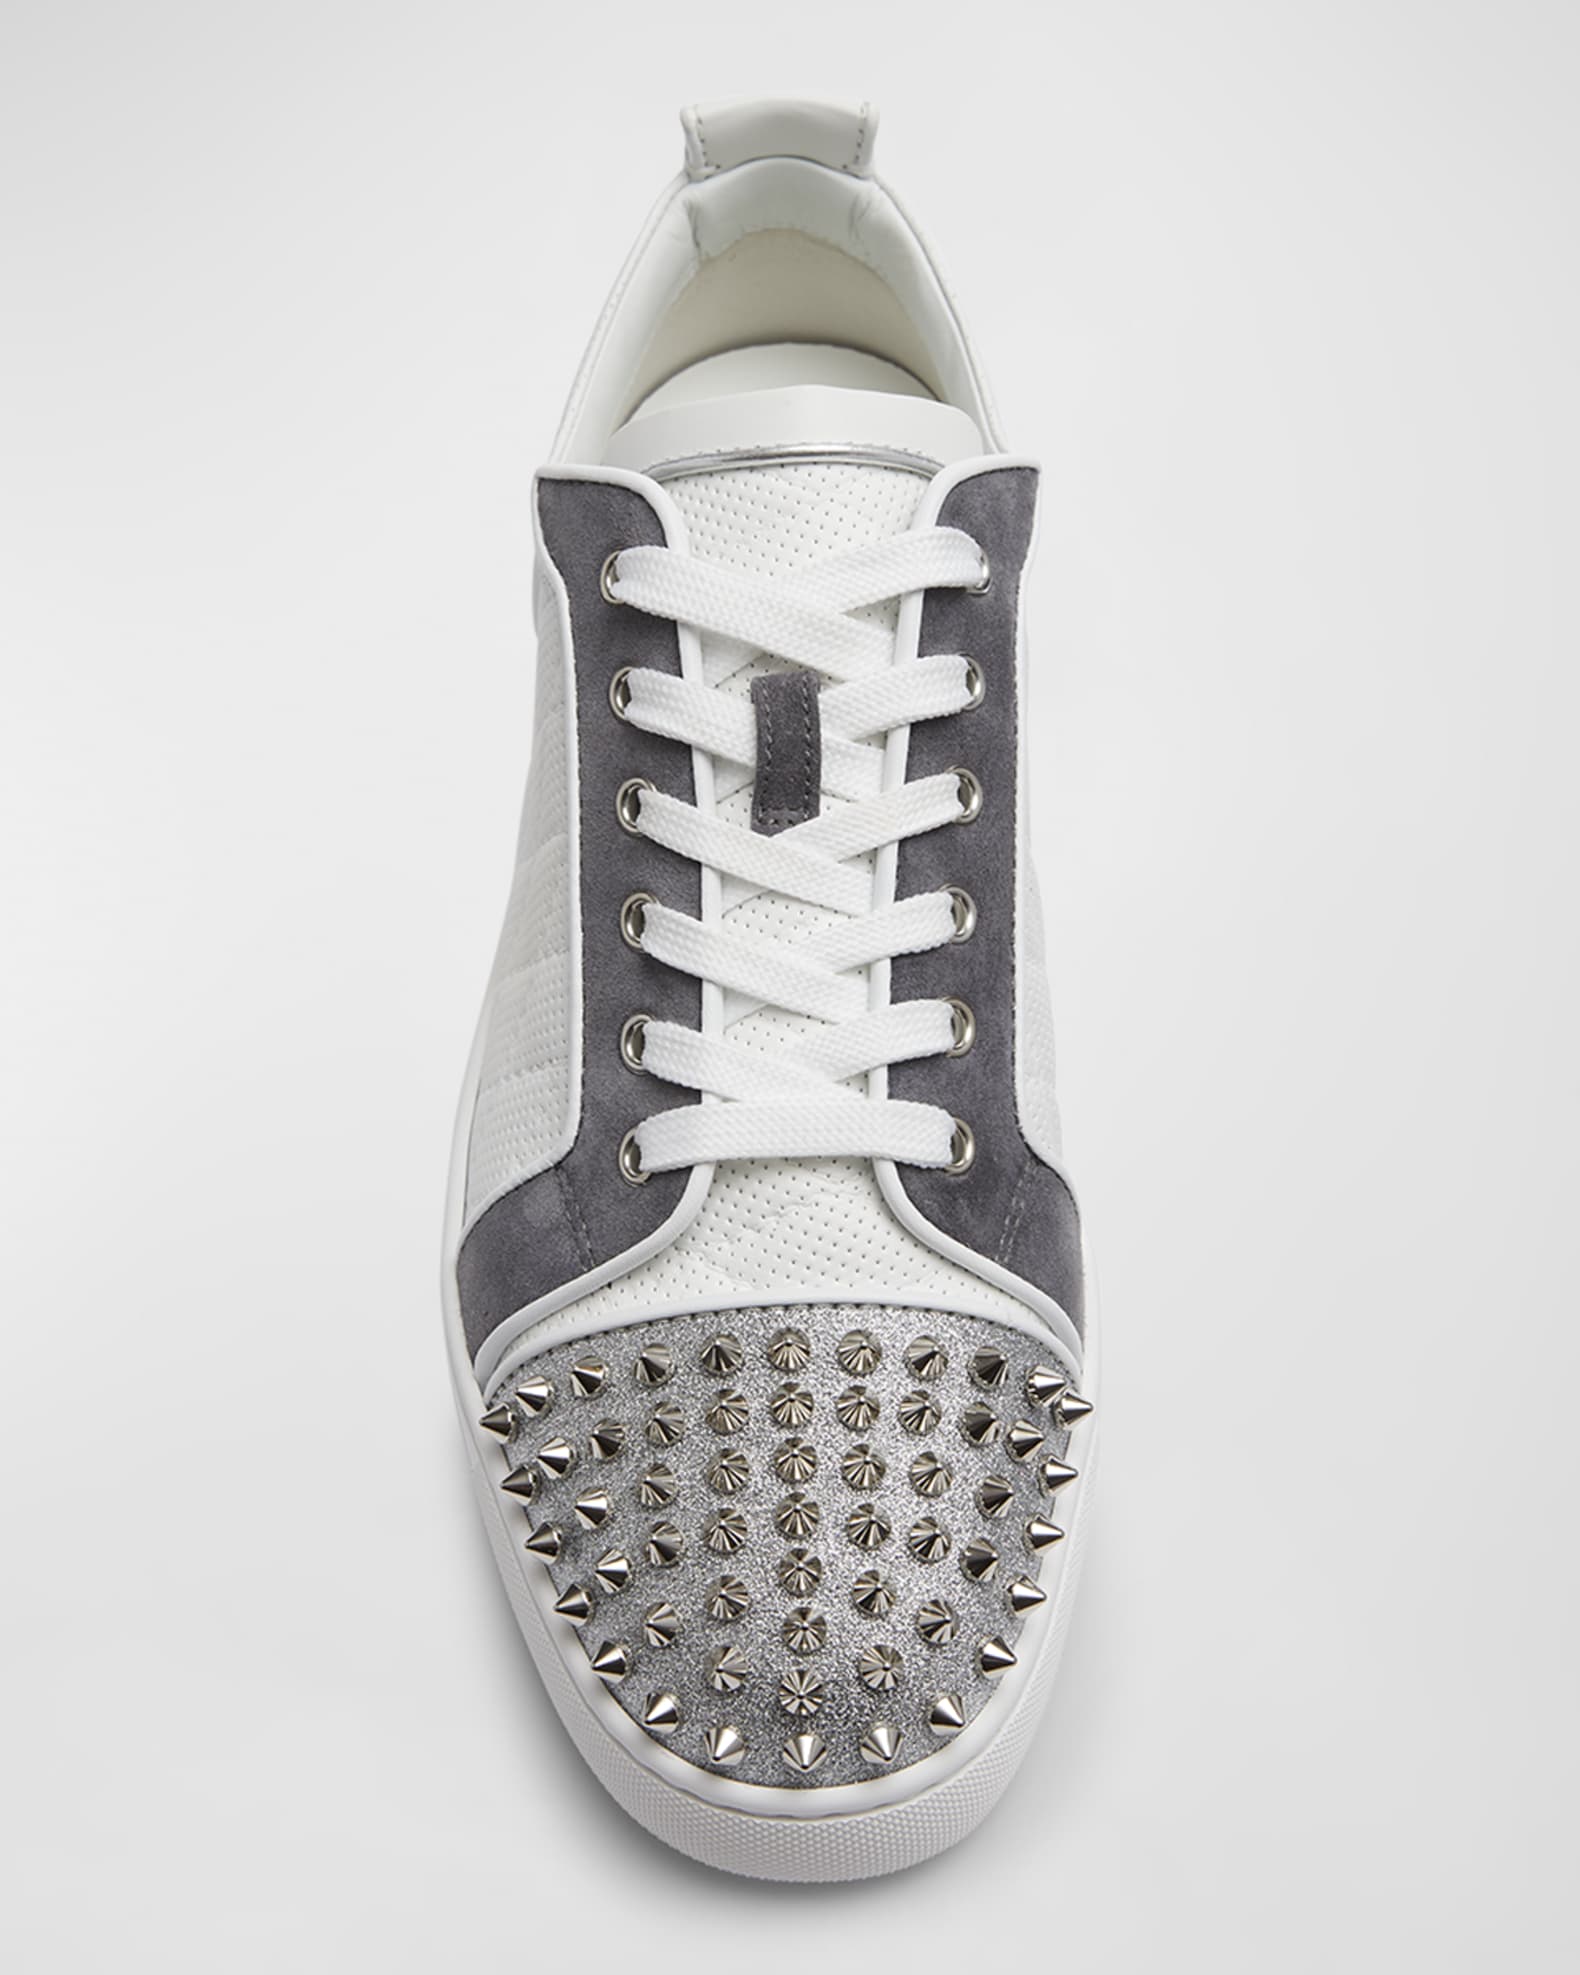 Christian Louboutin<br/><br/>Louis Junior Spikes Orlato Blue Suede